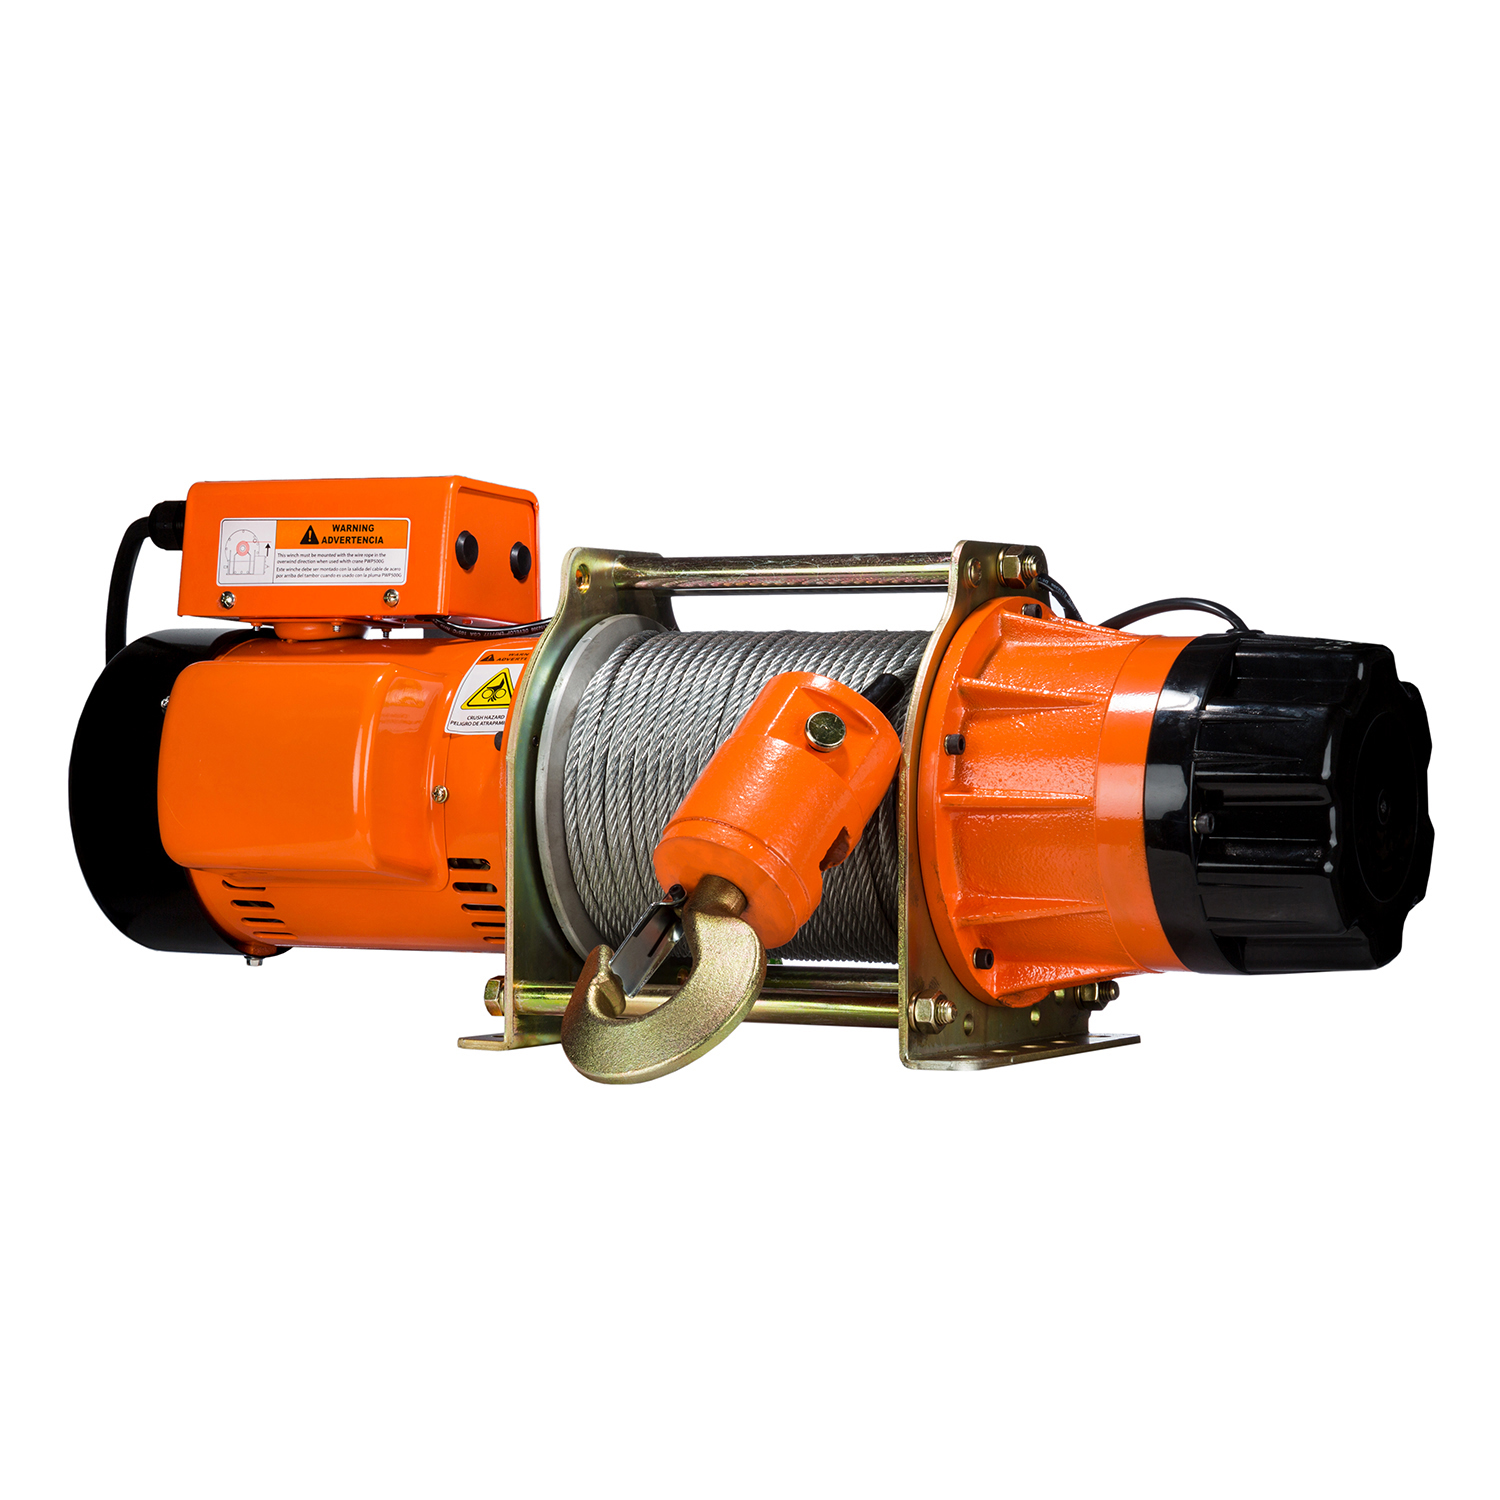 Prowinch 1300 lbs Electric Winch Wire Rope 220/240V